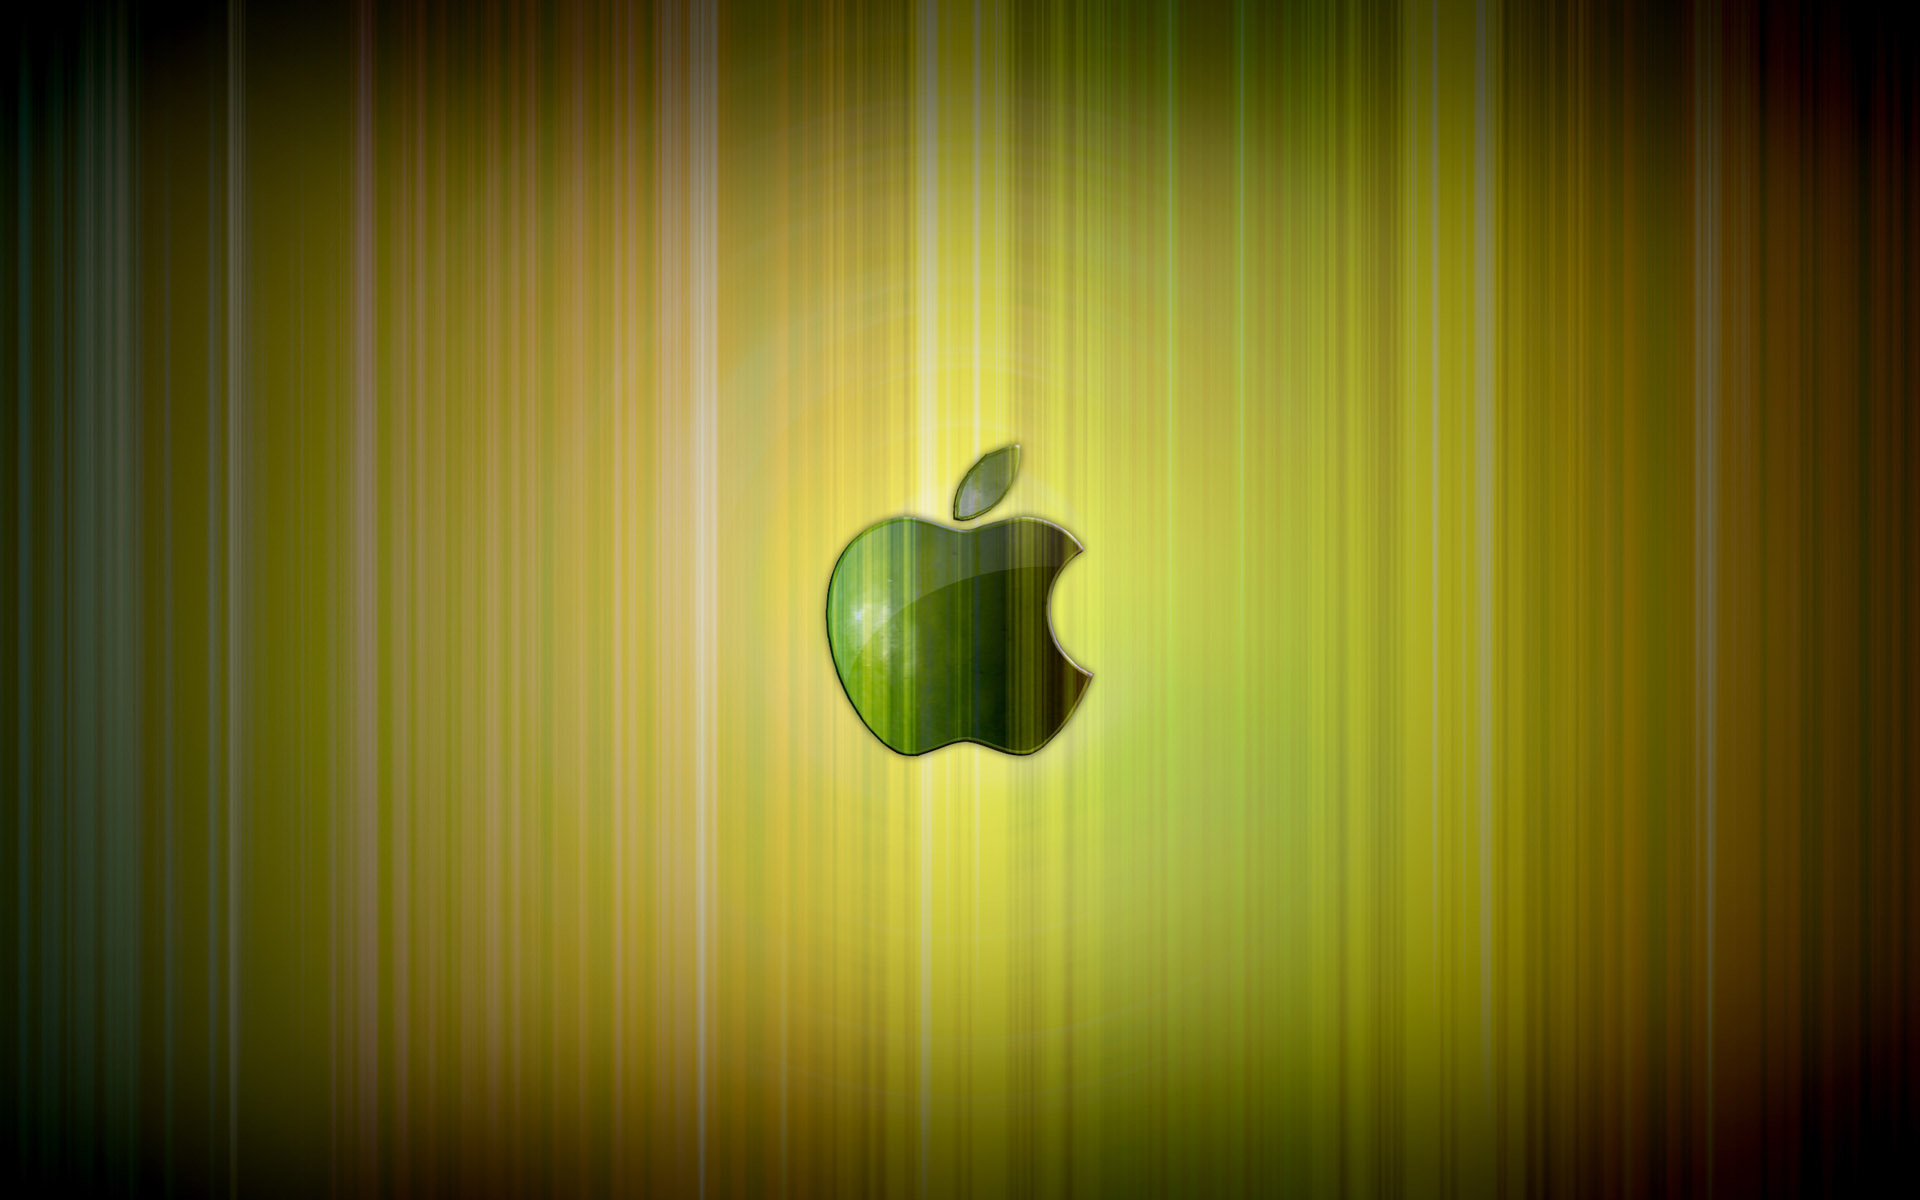 A Green Apple Logo in the Central Part, Background is ...